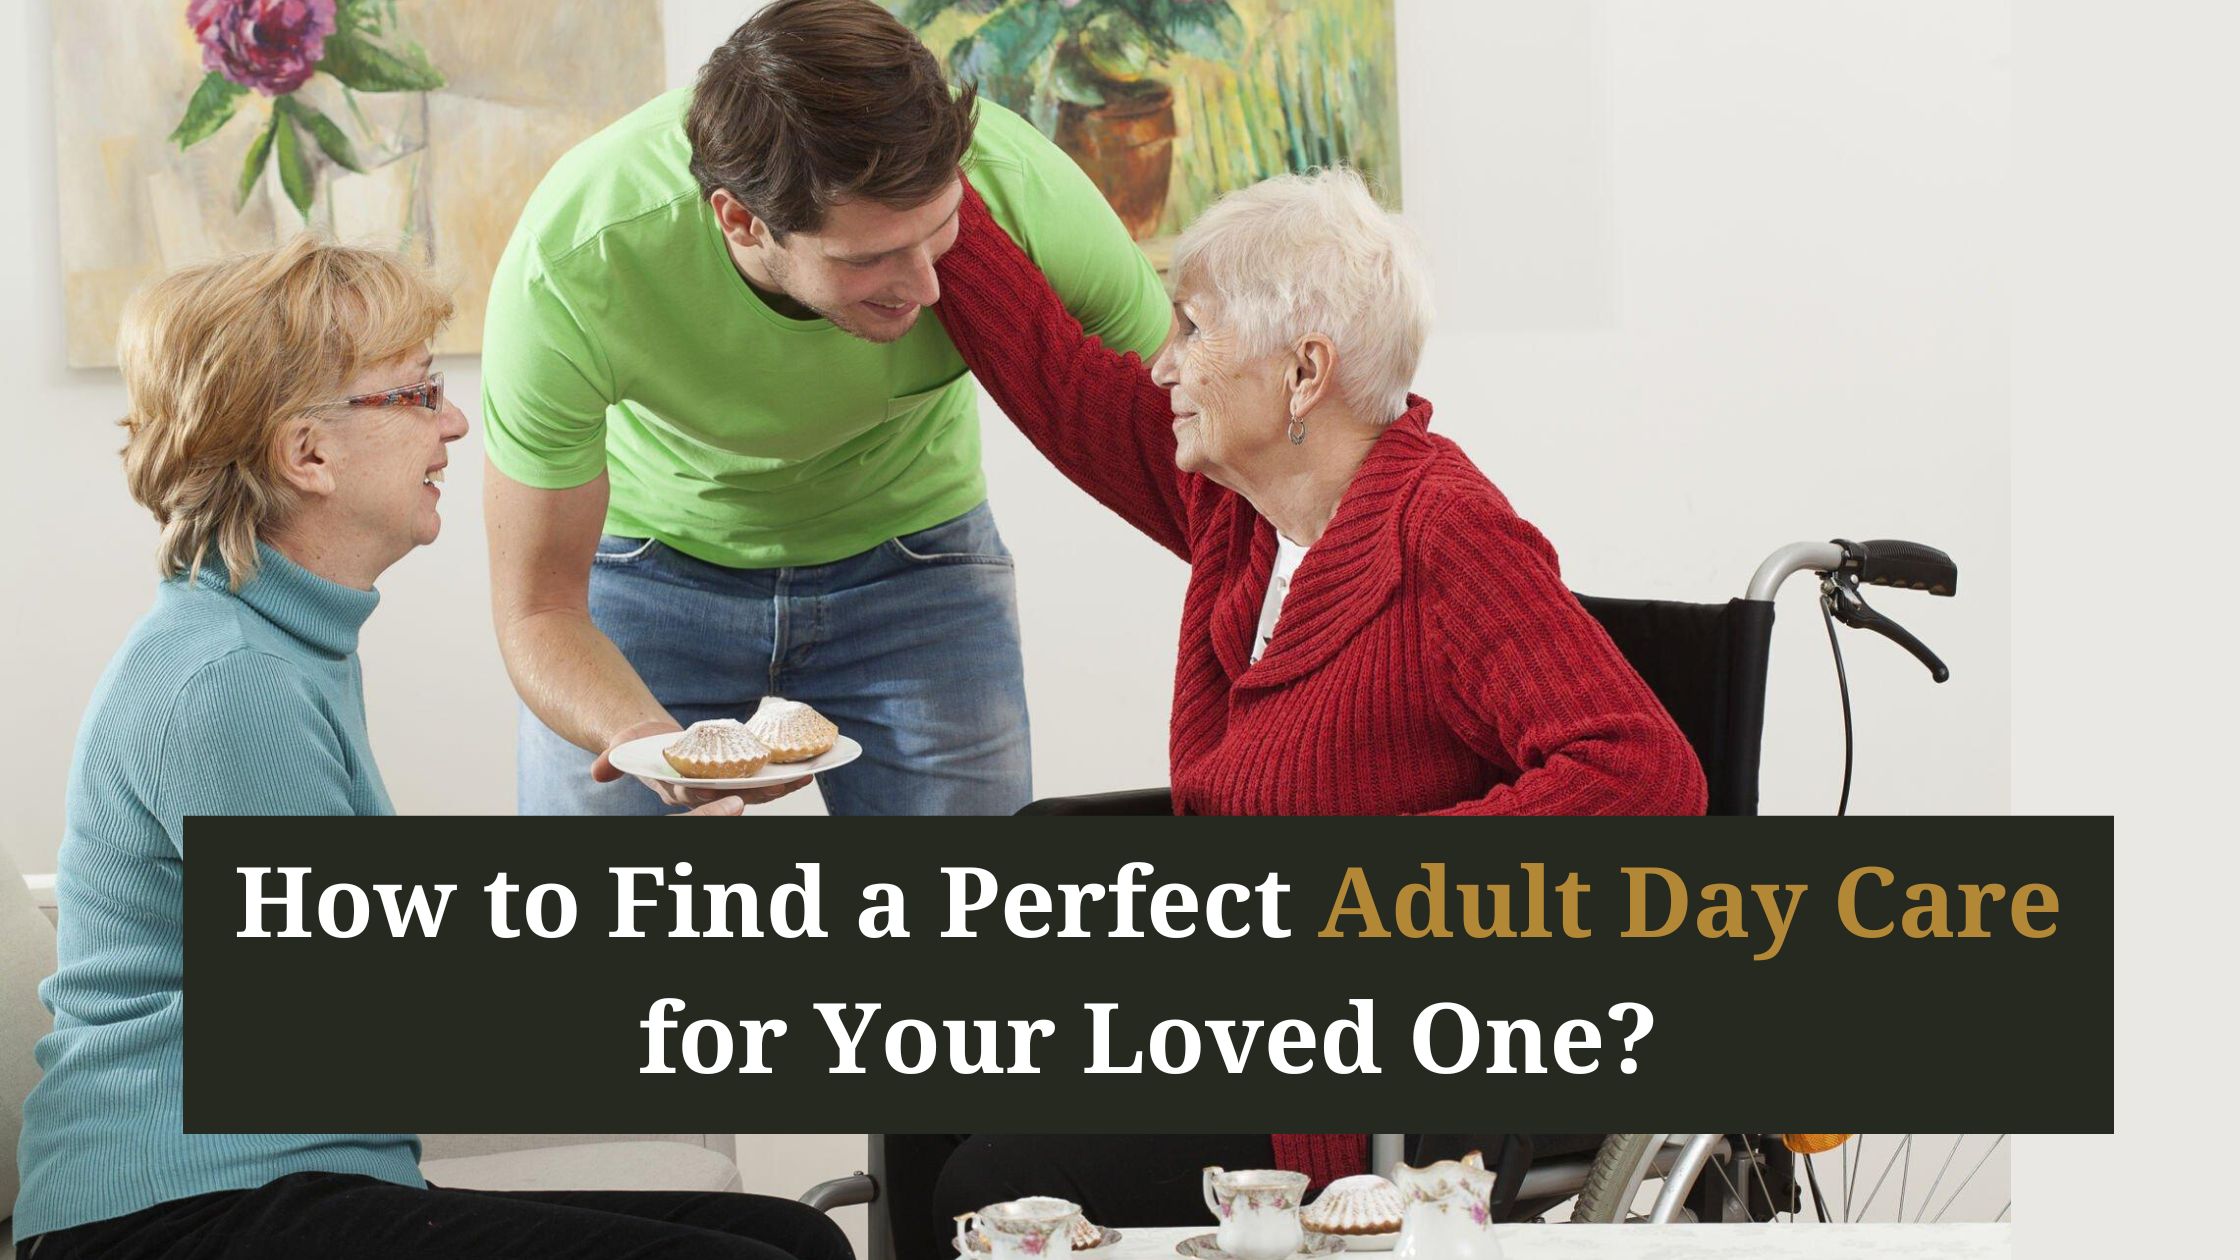 How to Find a Perfect Adult Day Care for Your Loved One